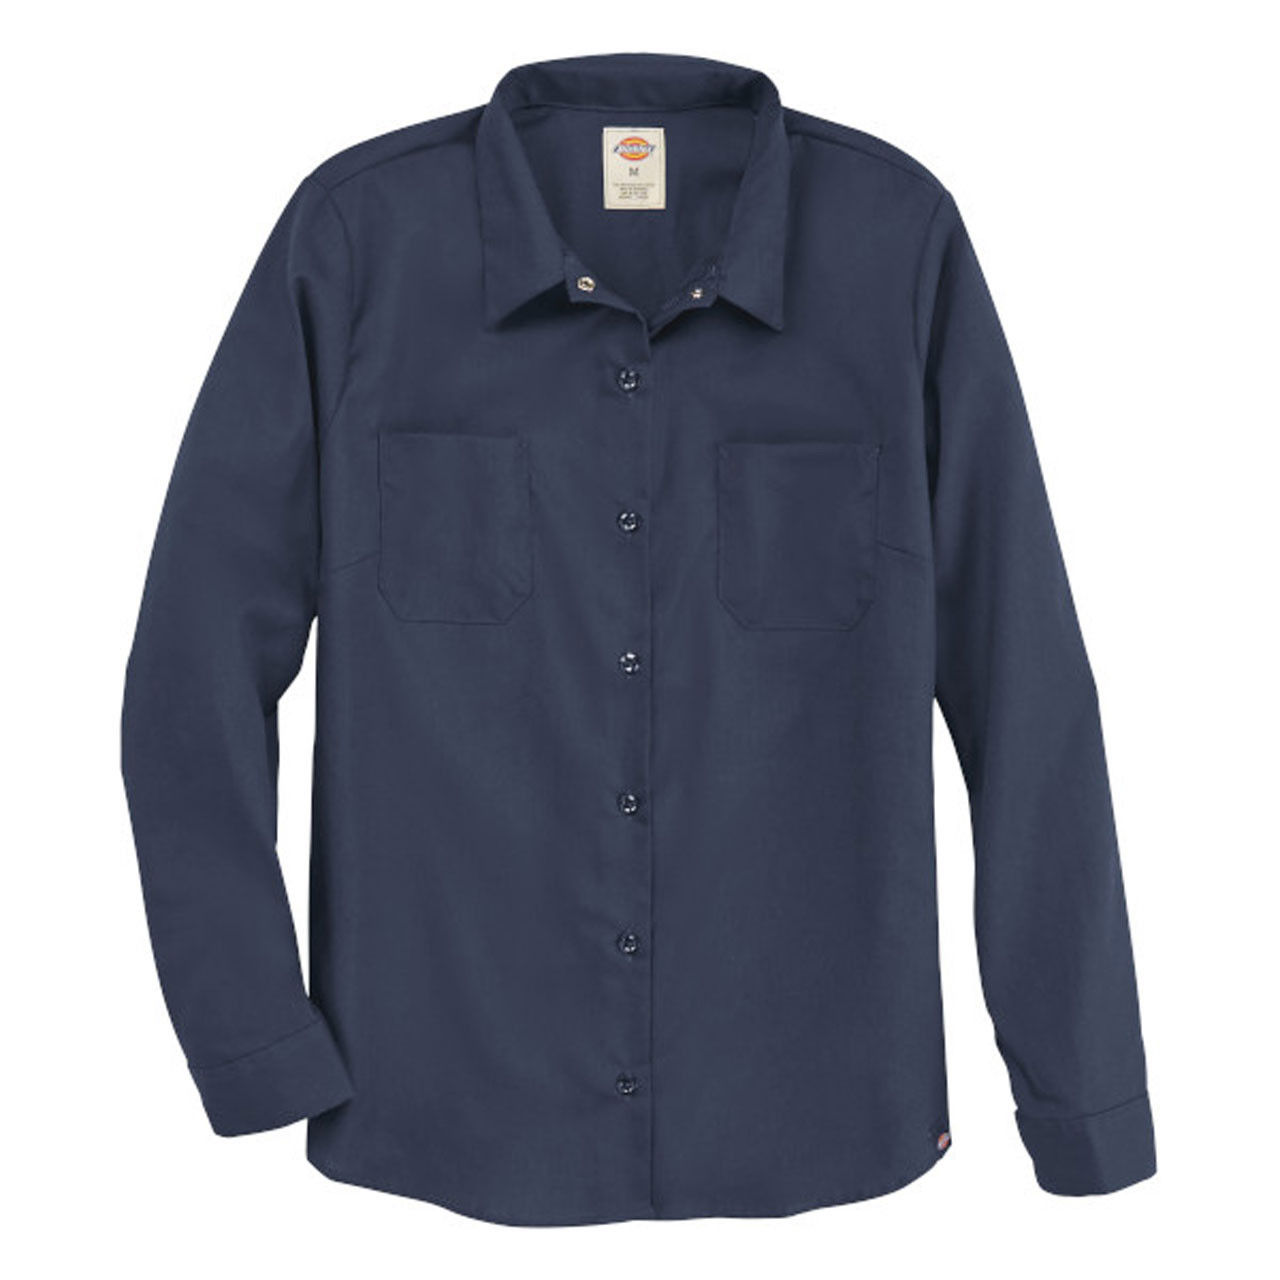 I need matching pants for the above Dickies women's work shirt L5350